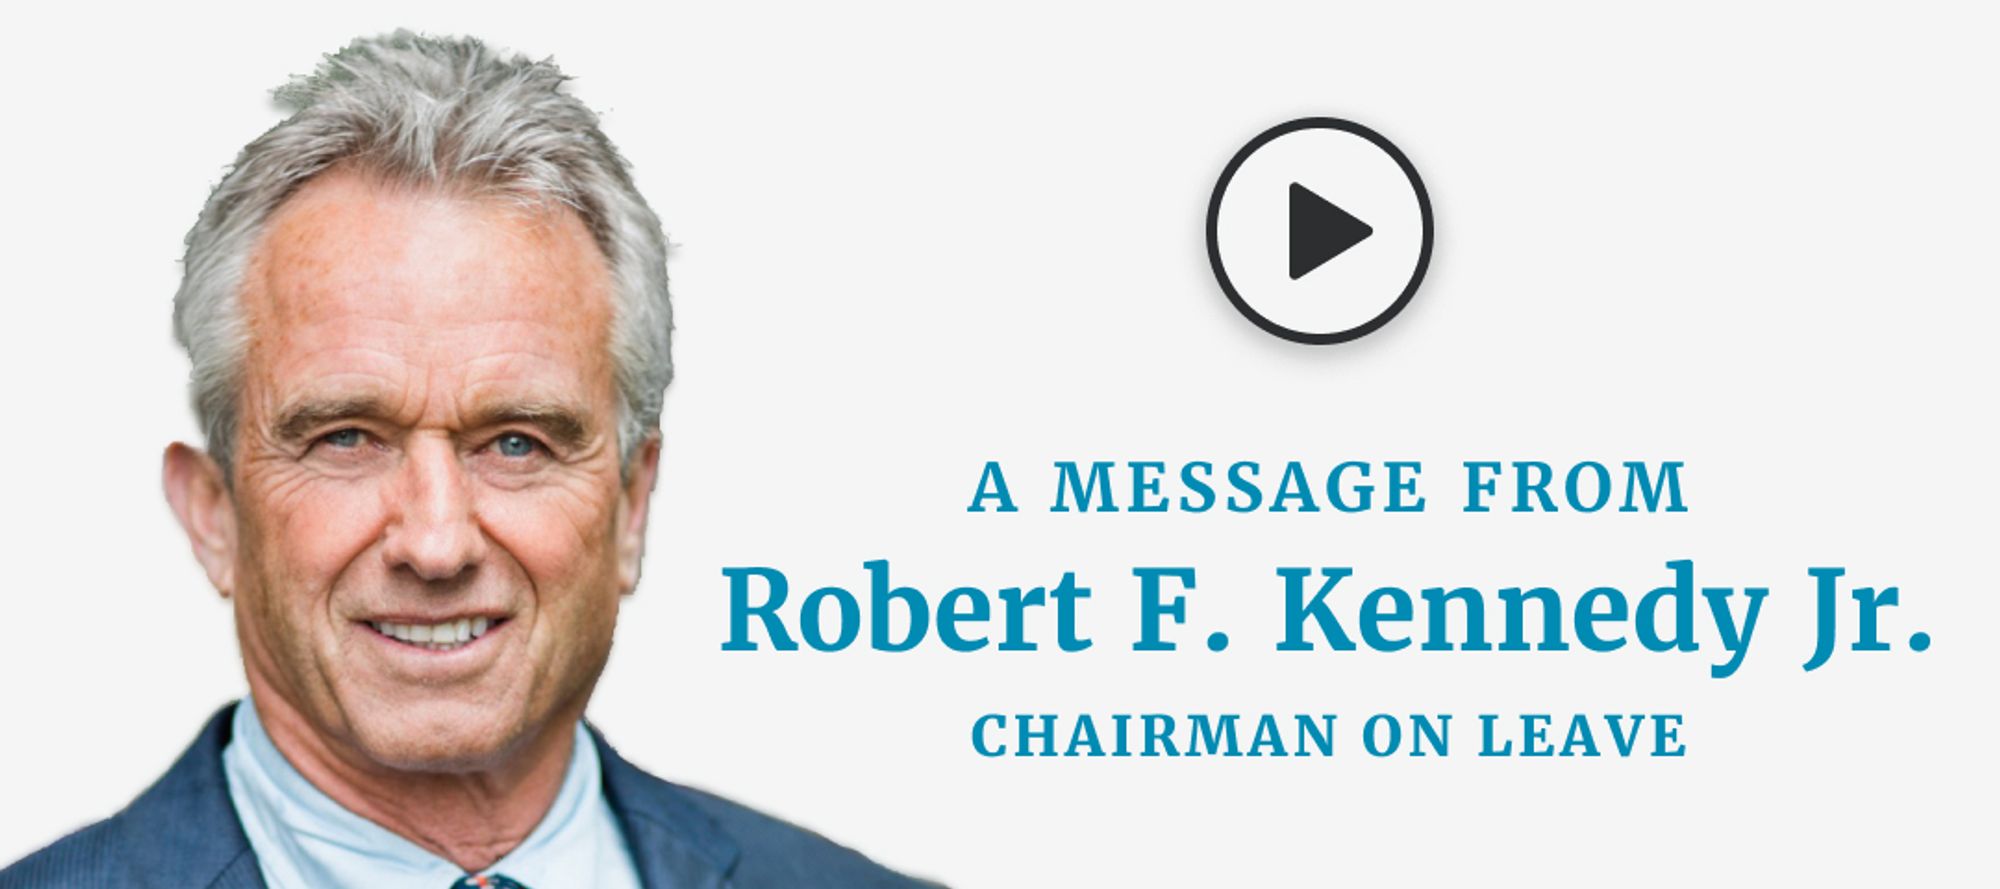 A Message from Robert F. Kennedy Jr. - Chairman on Leave